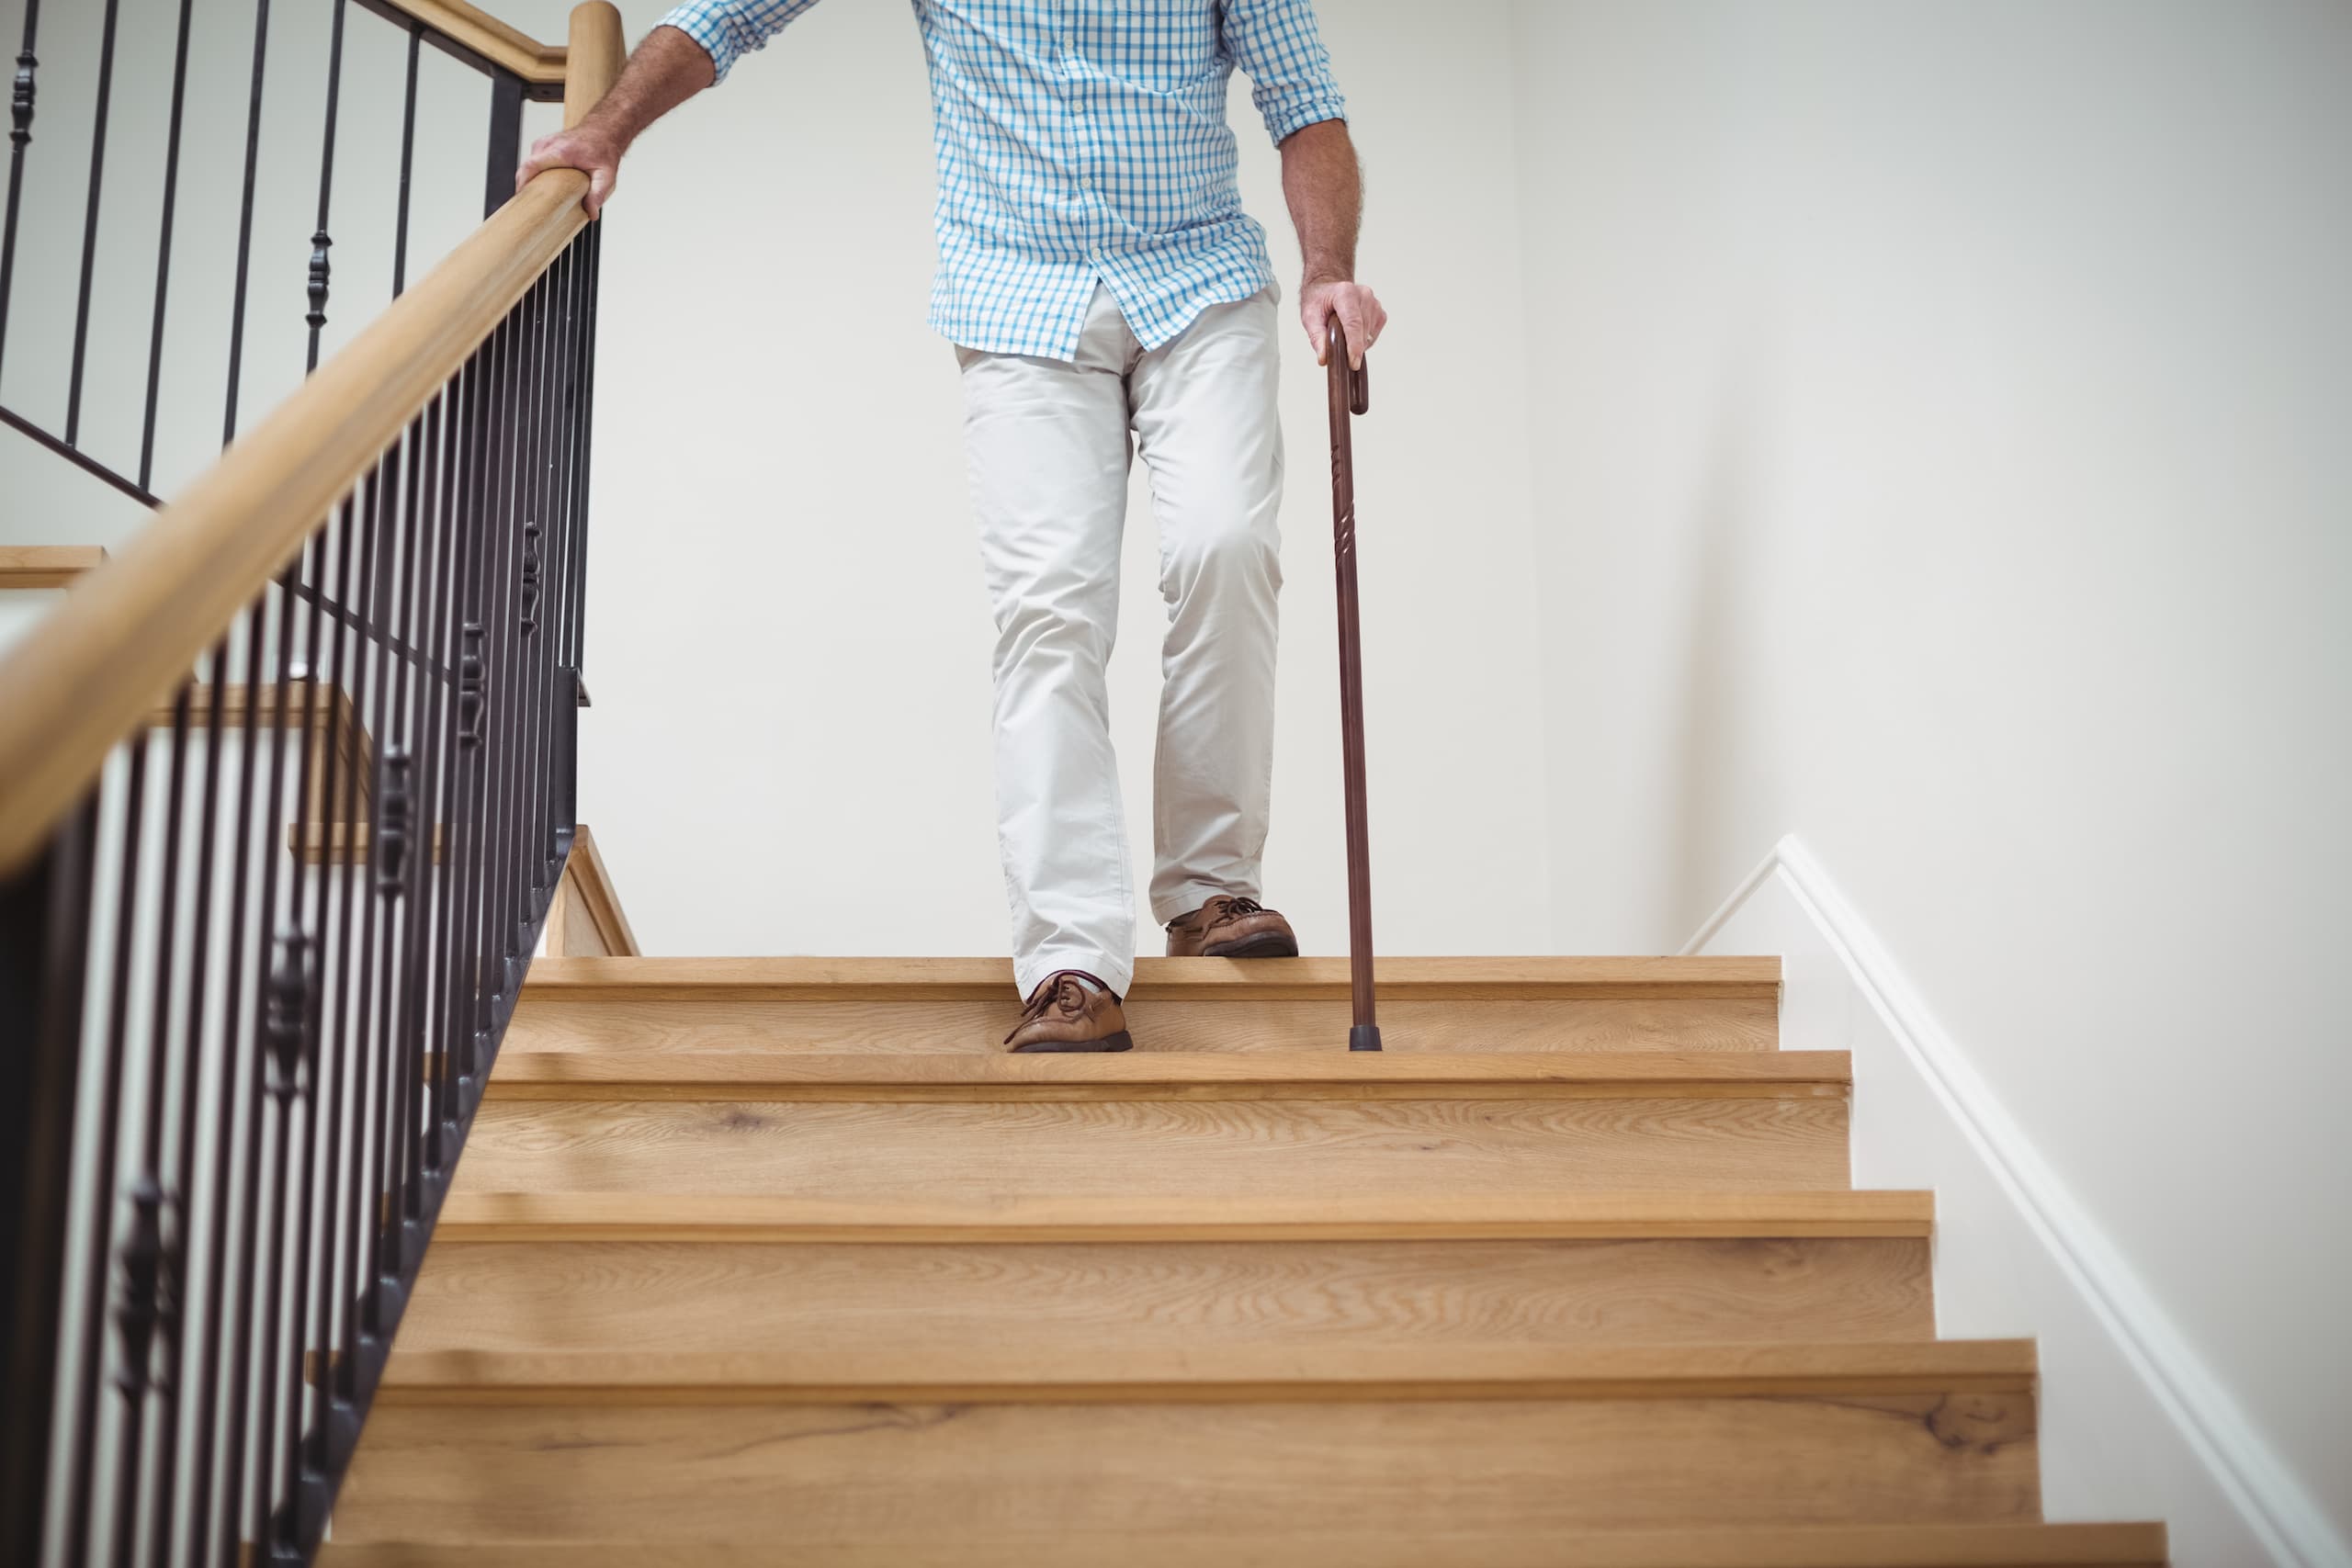 older adult going down stairs balance stability